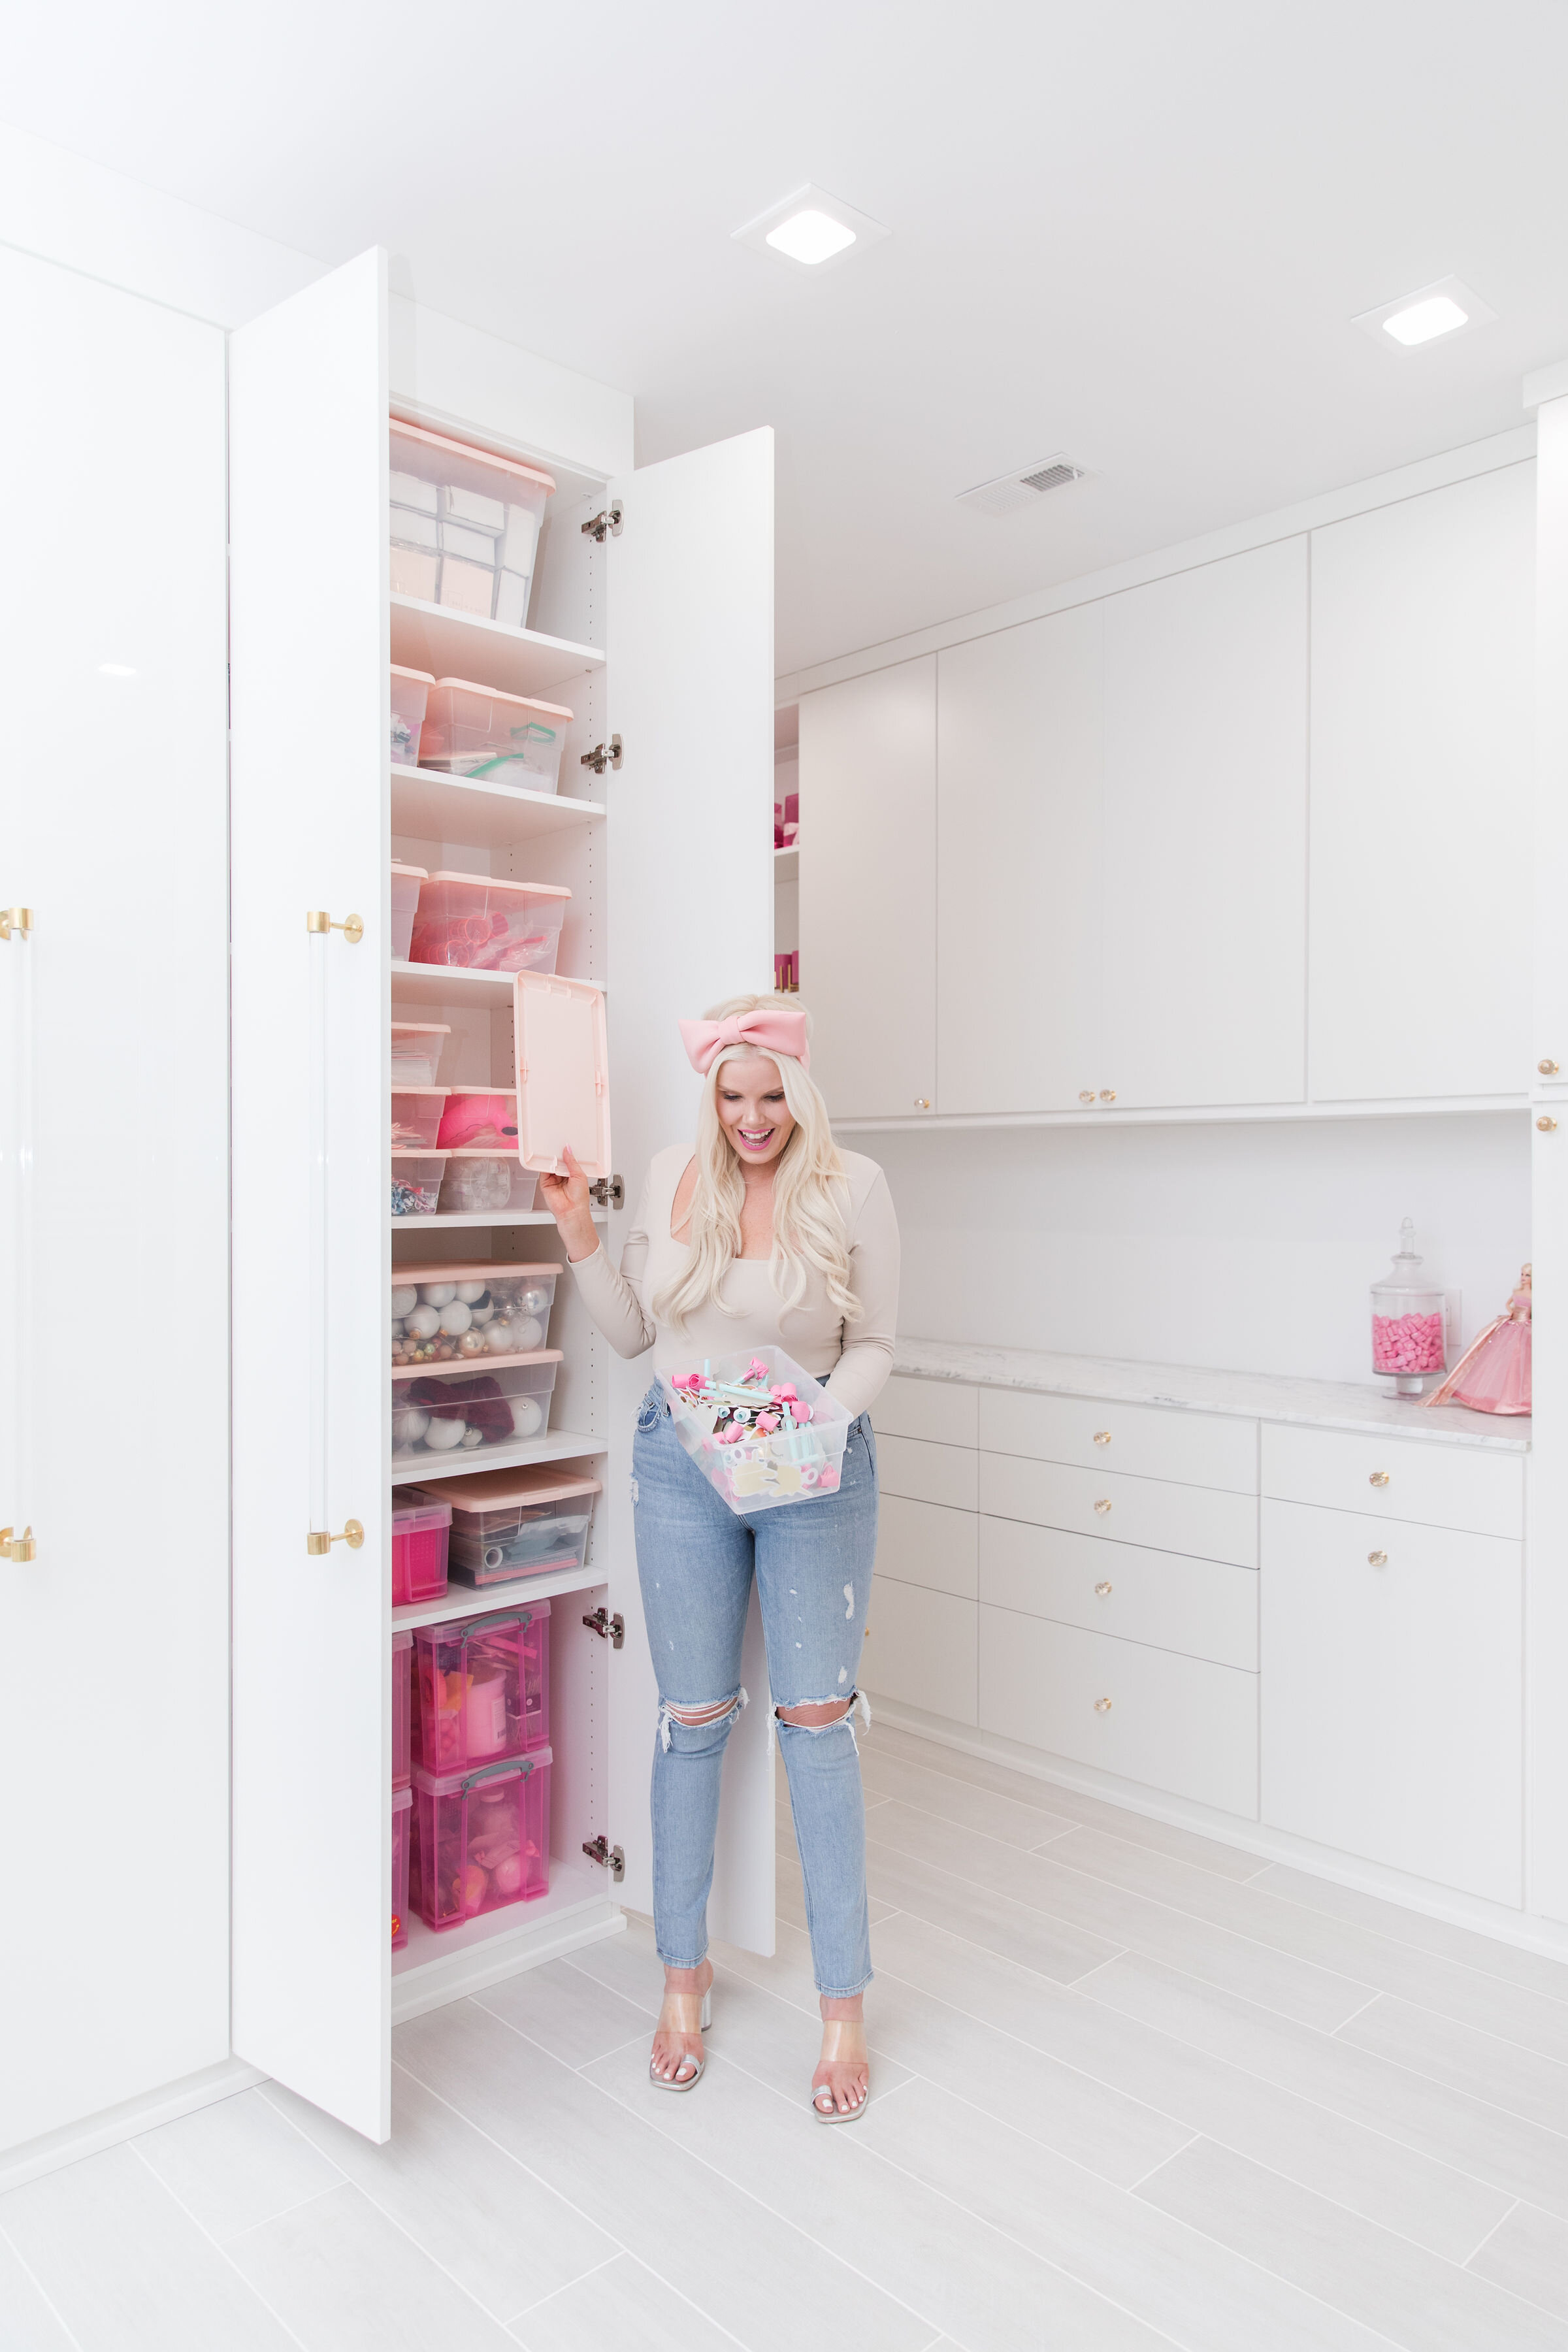 POSH-PR-The-Caroline-Doll-Barbie-Office-Pink-Style-Boss-Goals-At-Home-Workspace-Luxury-Fashion-Infused-Office-The-Doll-HQ-Organized-Storage-Room-Office-Goals-California-Closets-Custom-Cabinets-Acrylic-Crystal-Details-5.jpg